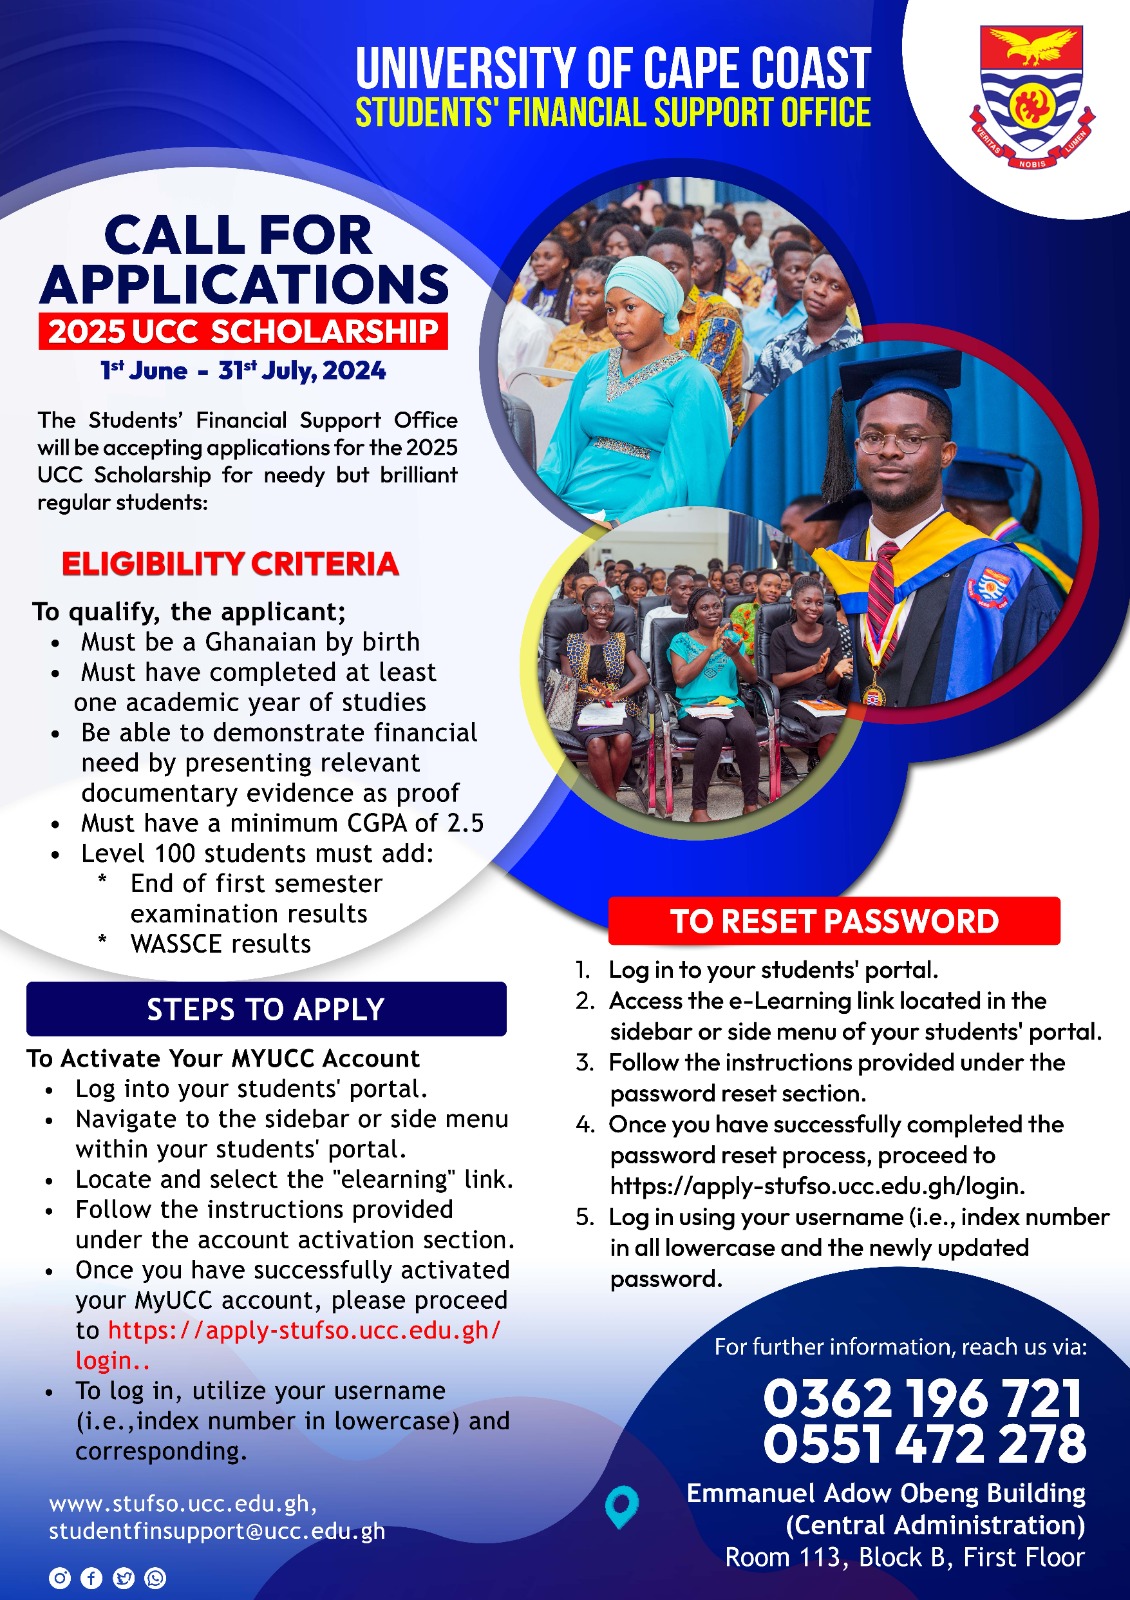 OPEN CALL FOR THE 2025 UCC SCHOLARSHIP APPLICATIONS